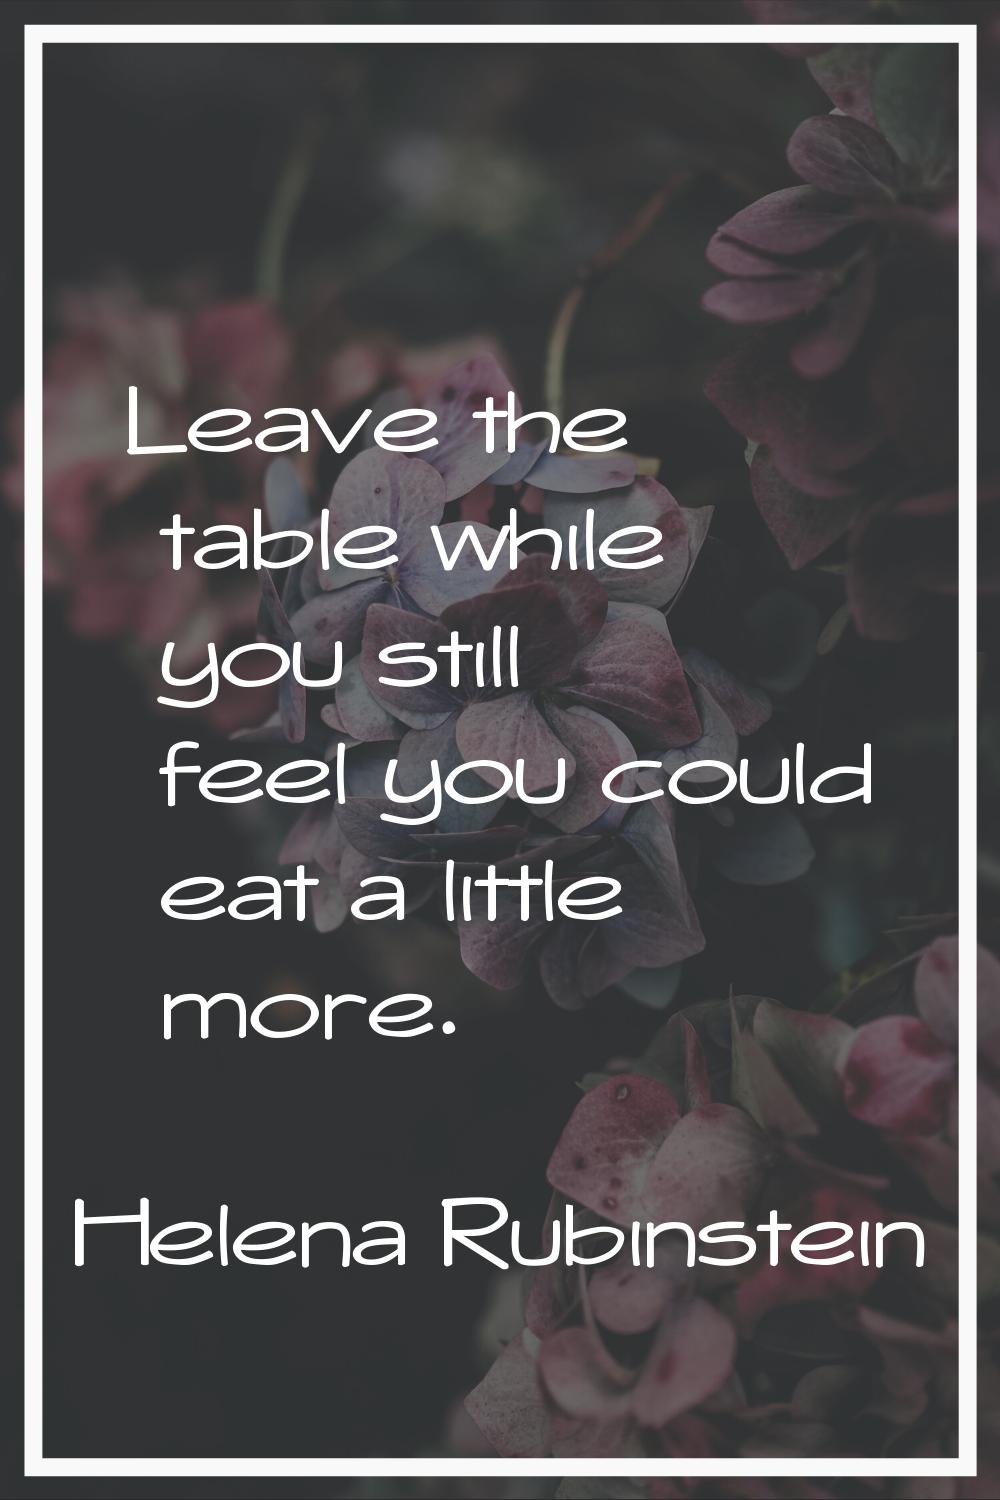 Leave the table while you still feel you could eat a little more.